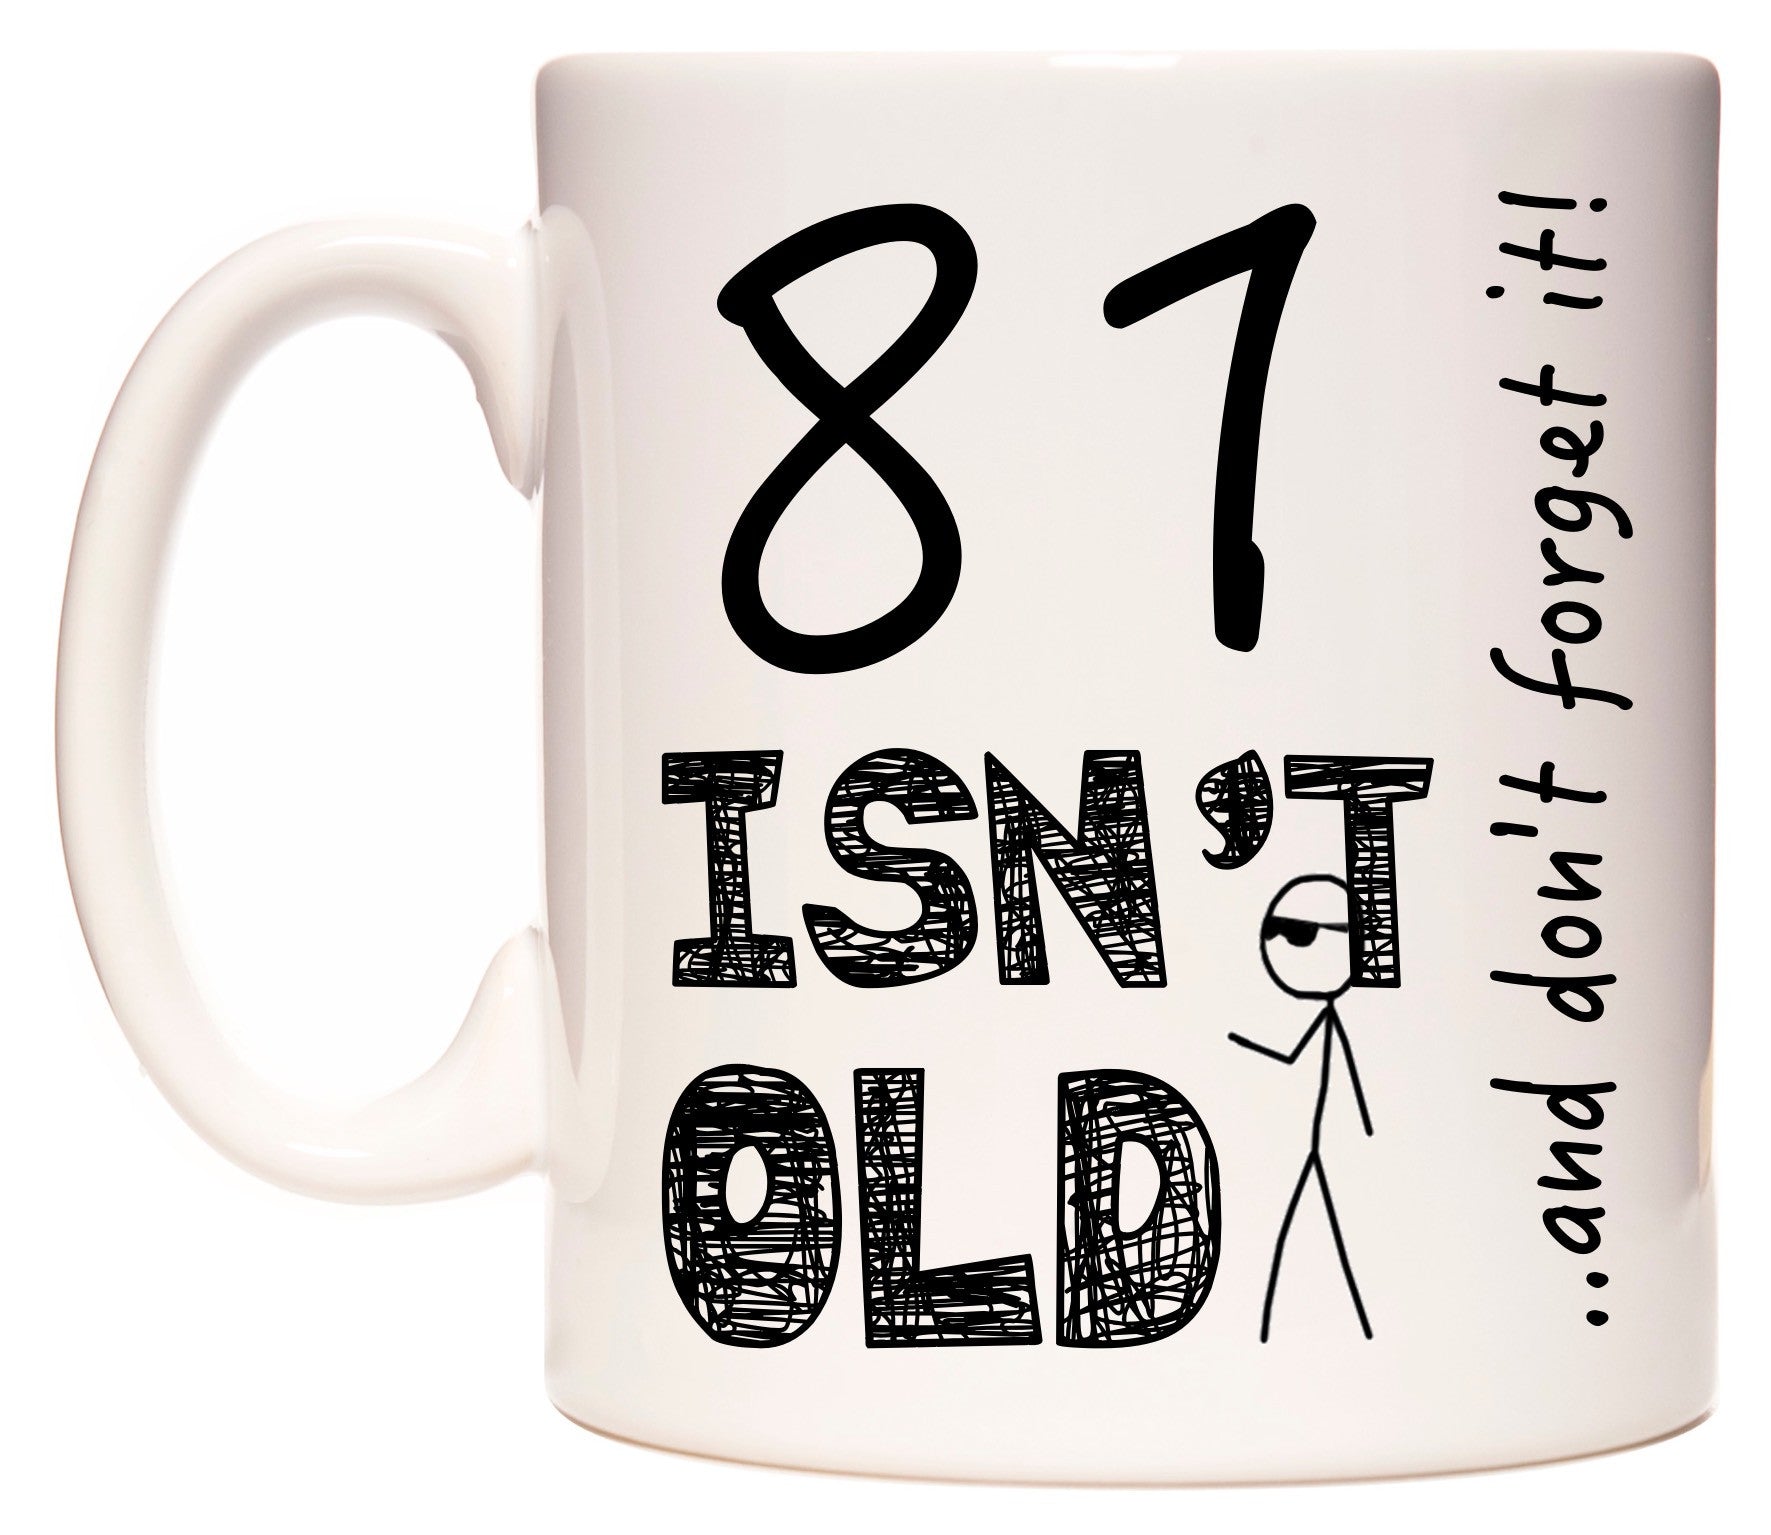 This mug features 81 Isn't Old